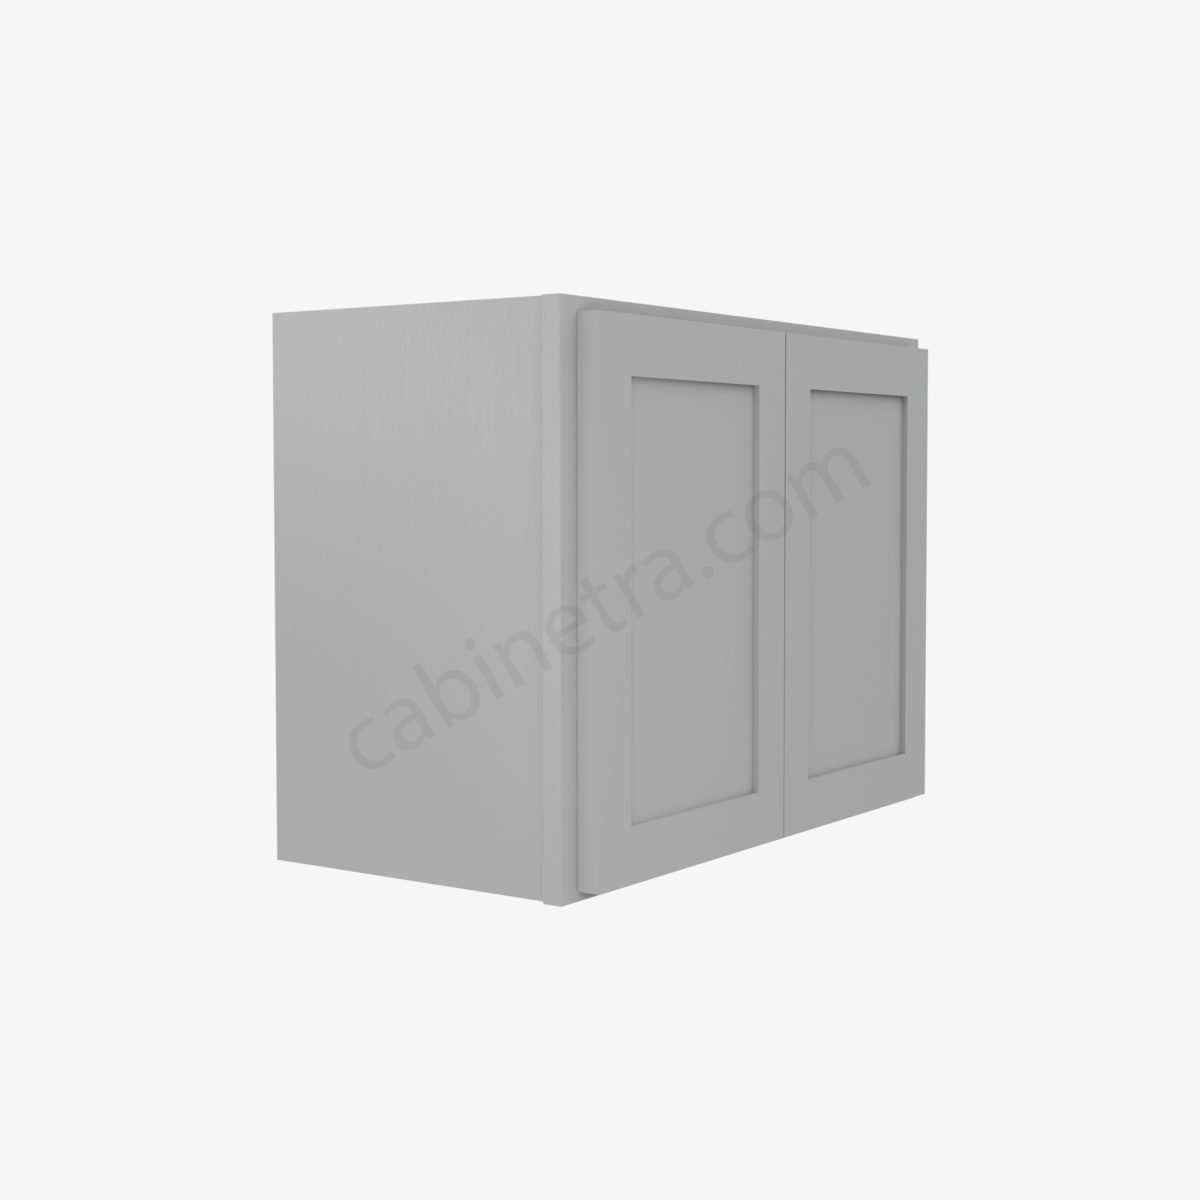 AB W2418B 4 Forevermark Lait Gray Shaker Cabinetra scaled